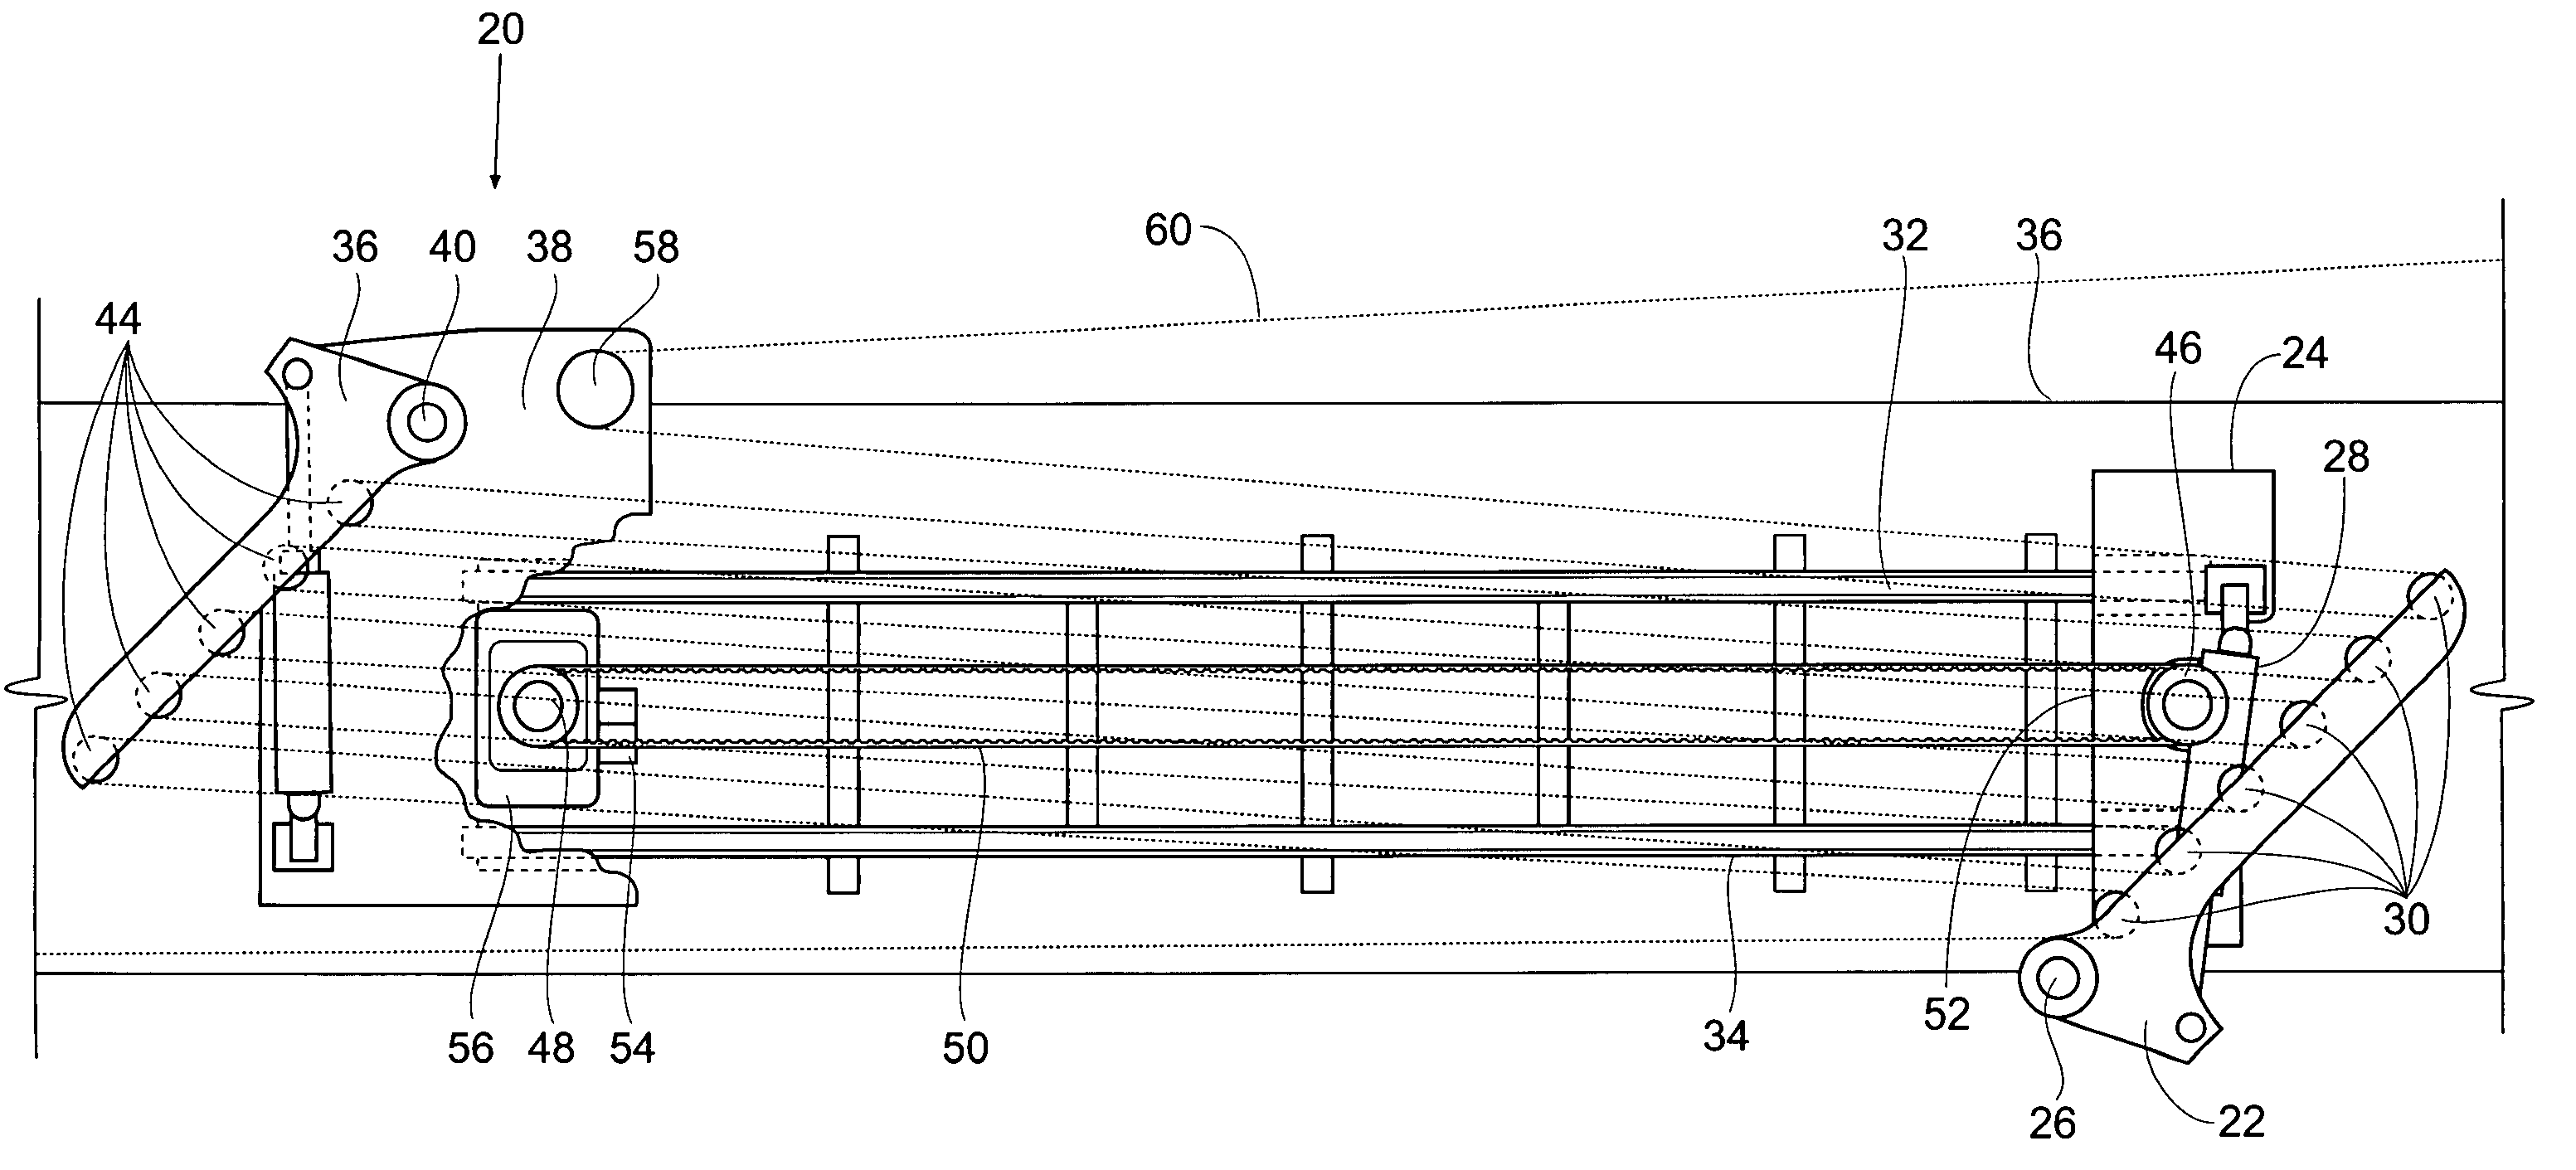 Apparatus and method of increasing web storage in a dancer